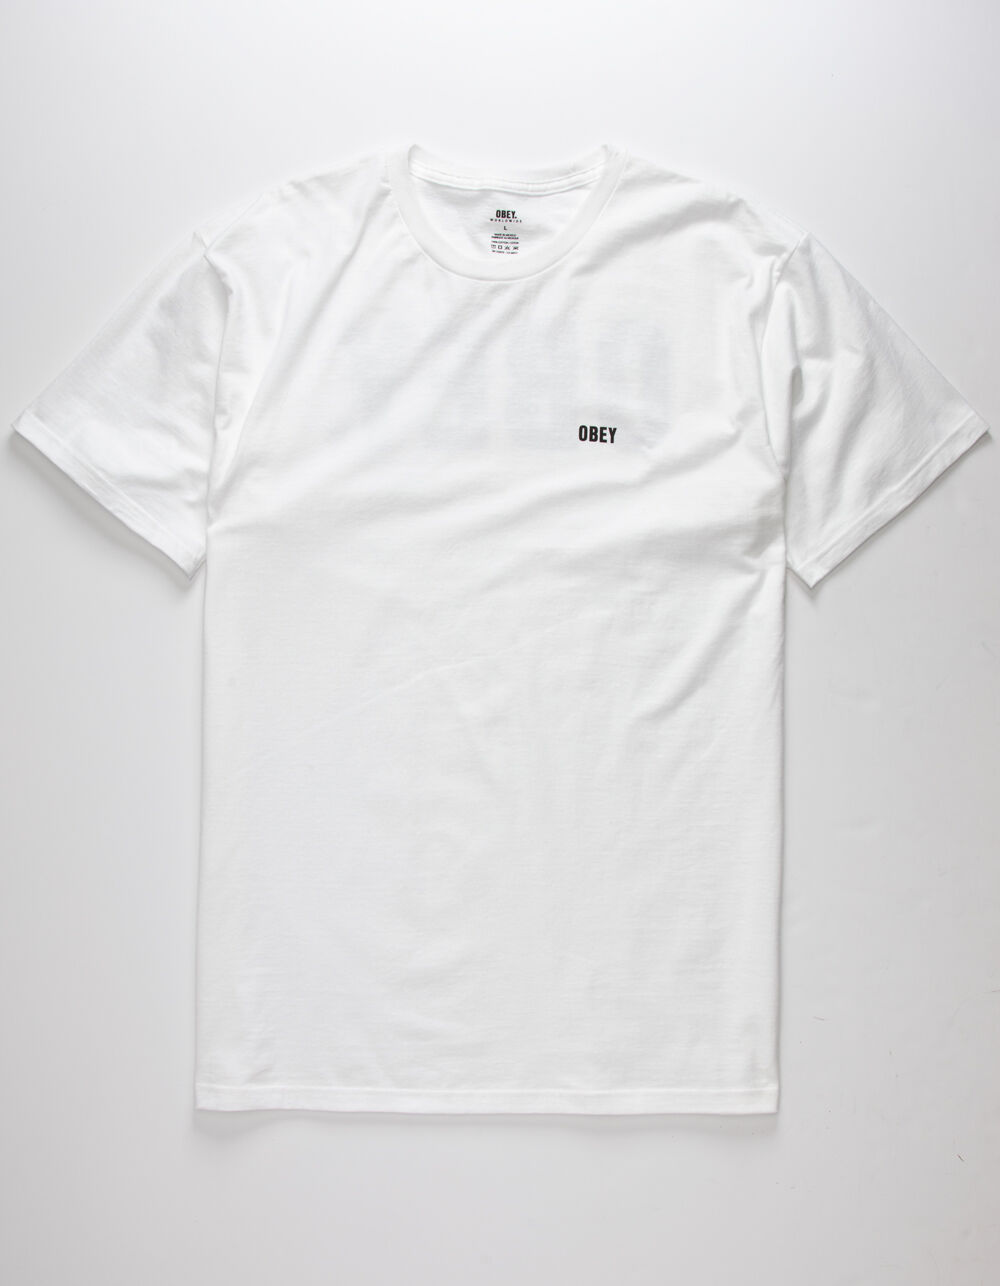 OBEY Official Mens White T-Shirt - WHITE | Tillys